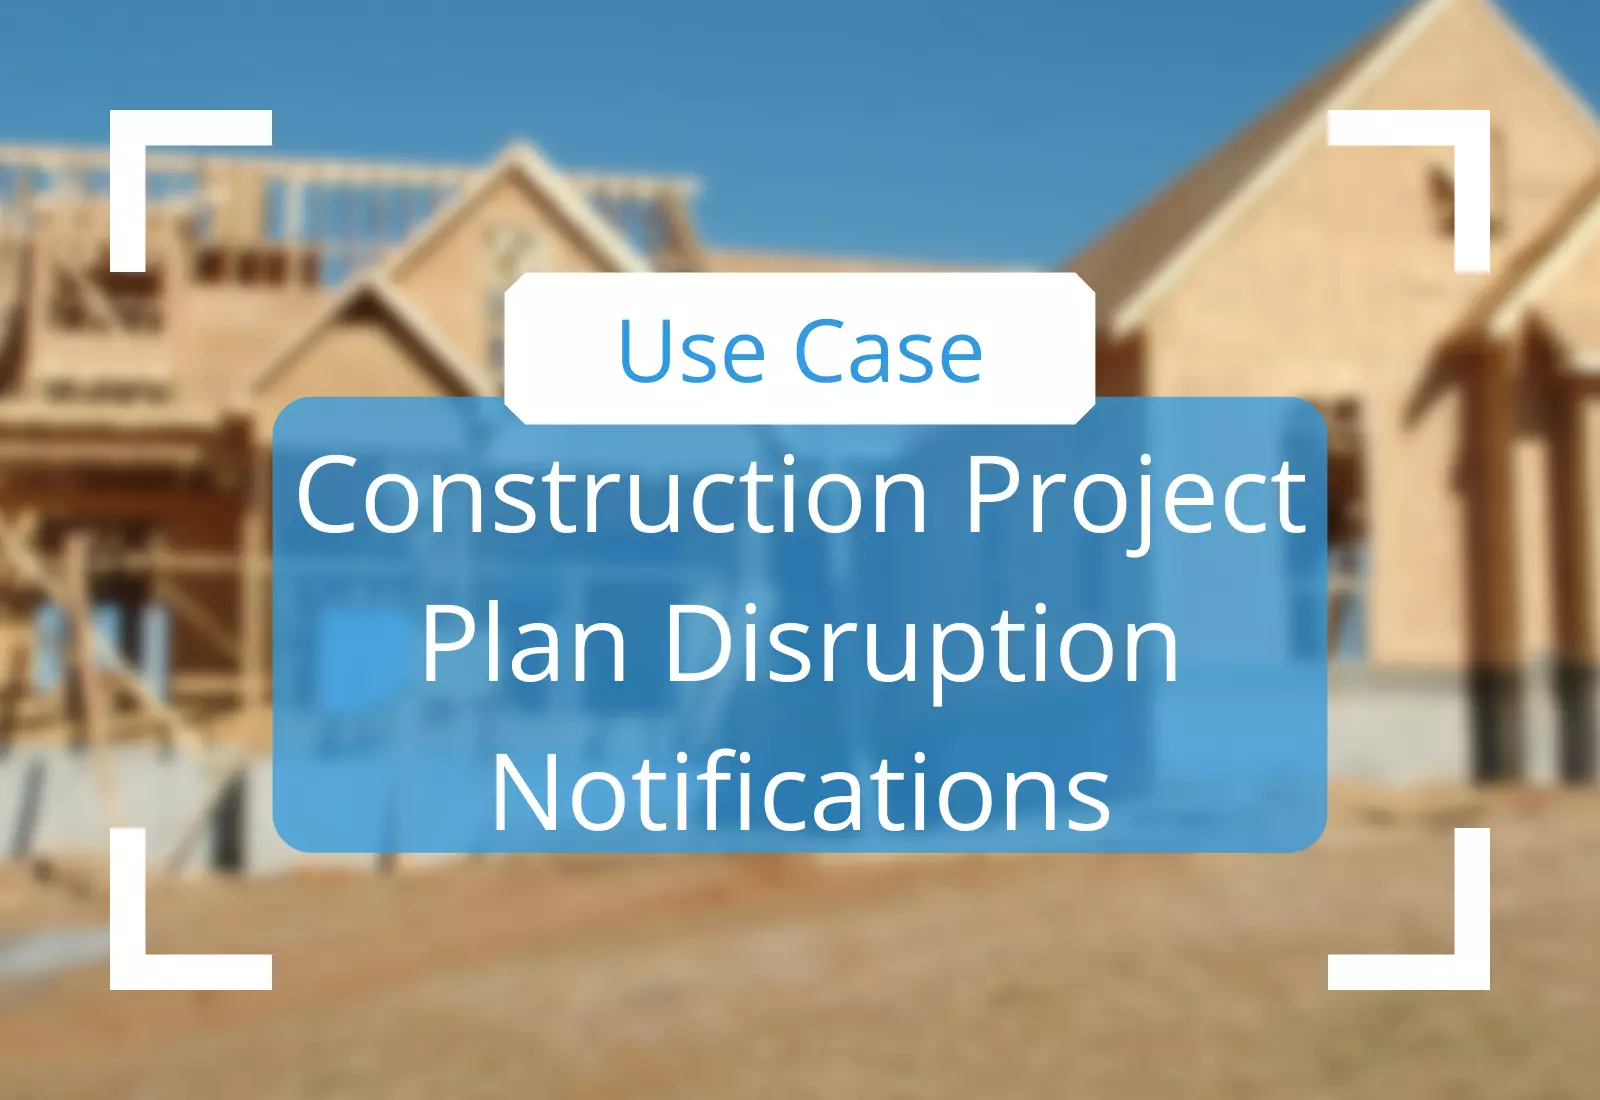 Construction Project Plan Disruption Notifications